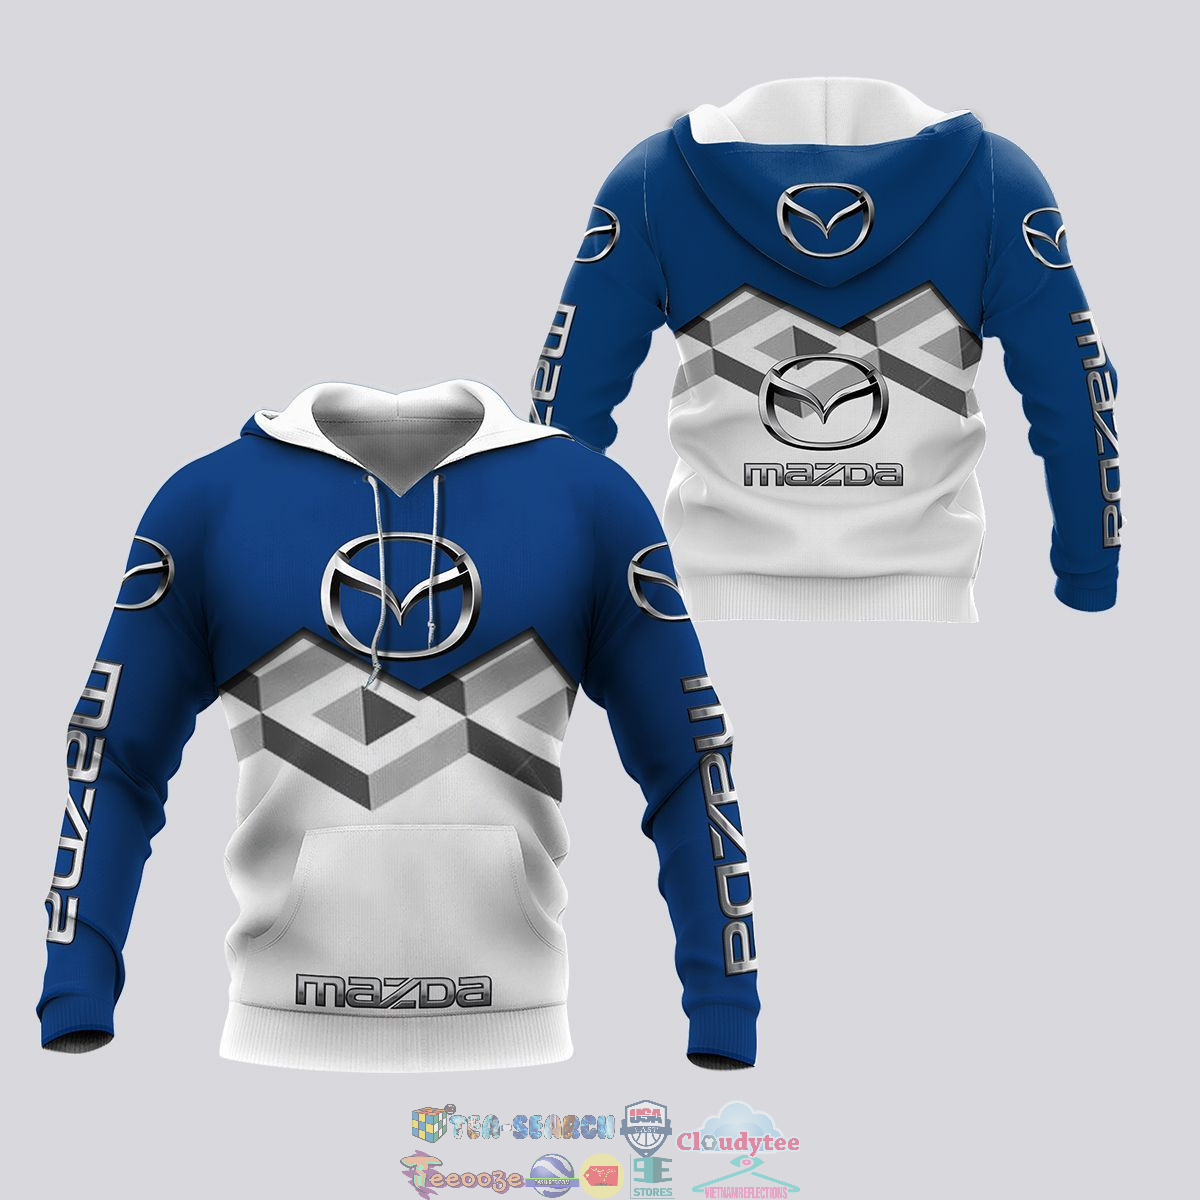 1lp7qWfd-TH130822-06xxxMazda-ver-10-3D-hoodie-and-t-shirt3.jpg